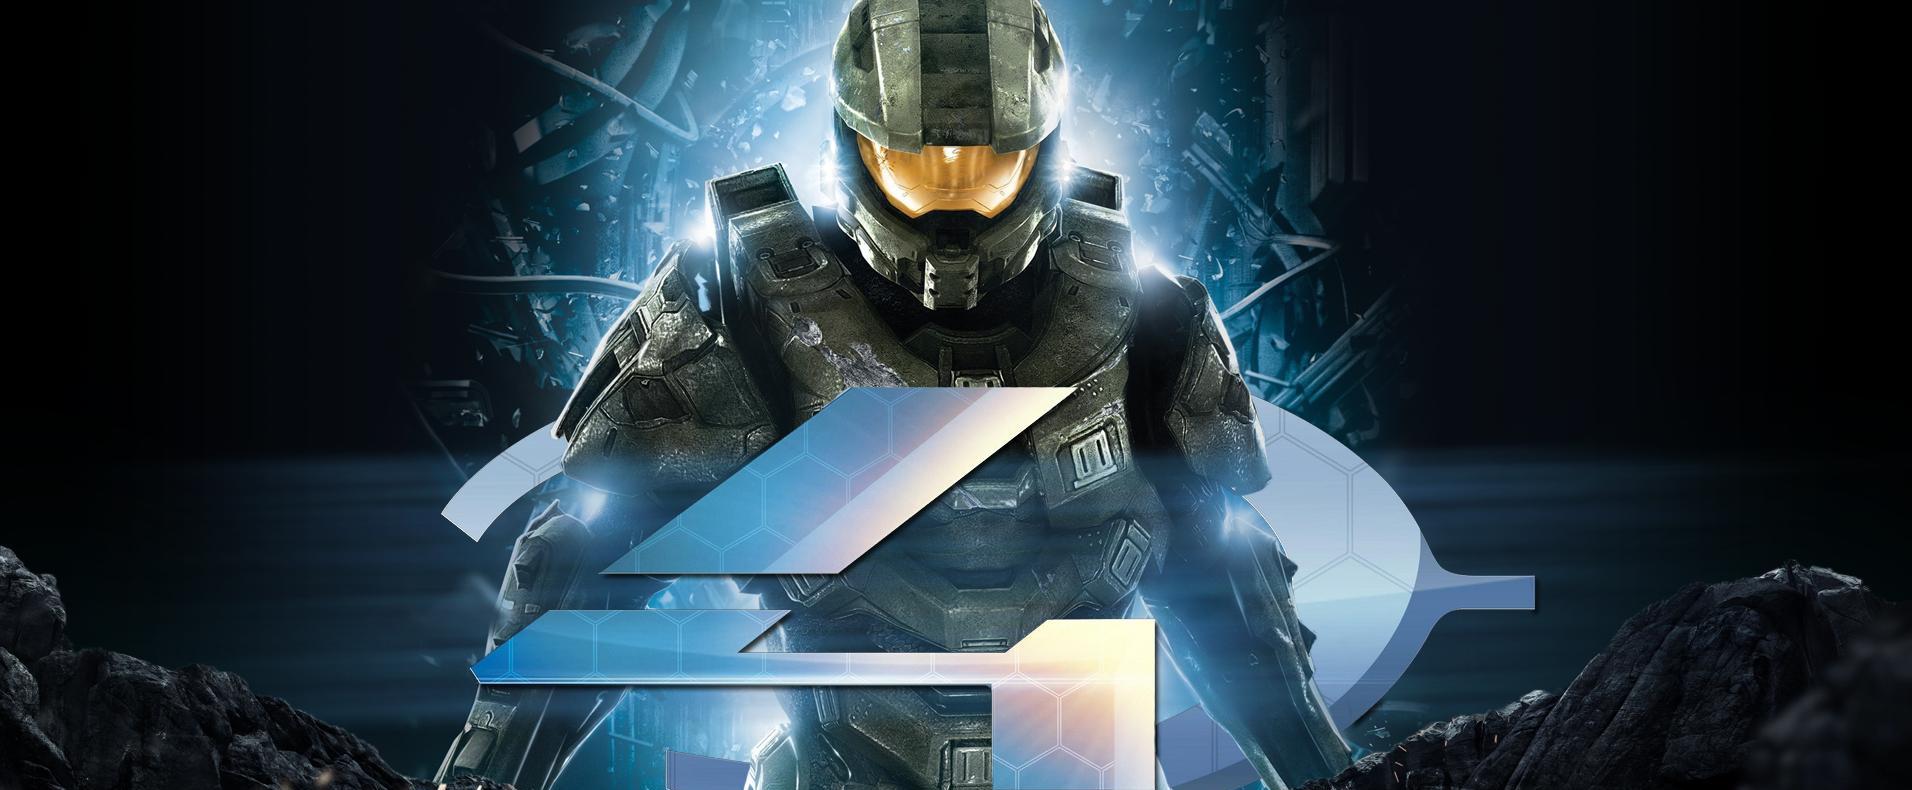 Microsoft Announced Halo The Master Chief Collection Games On Xbox